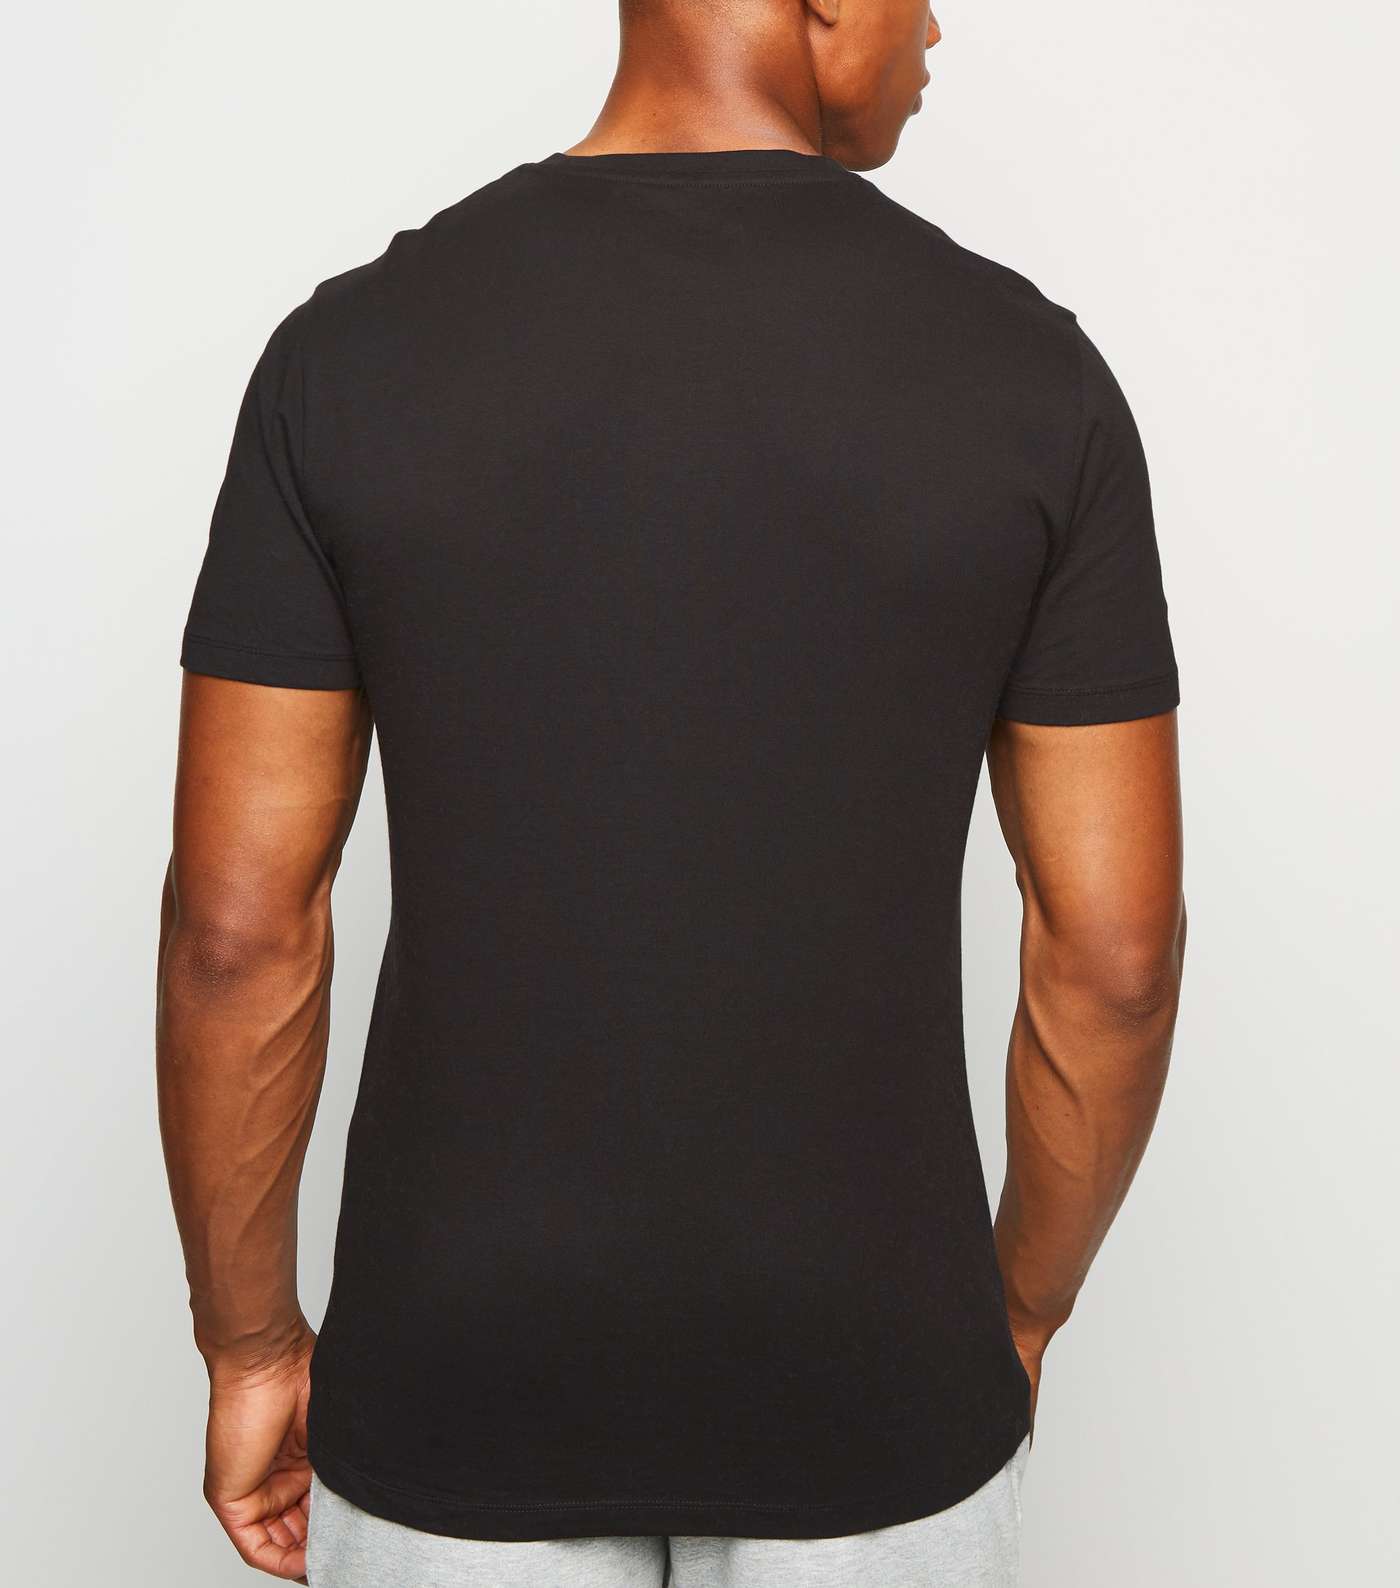 Black Short Sleeve Muscle Fit T-Shirt Image 3